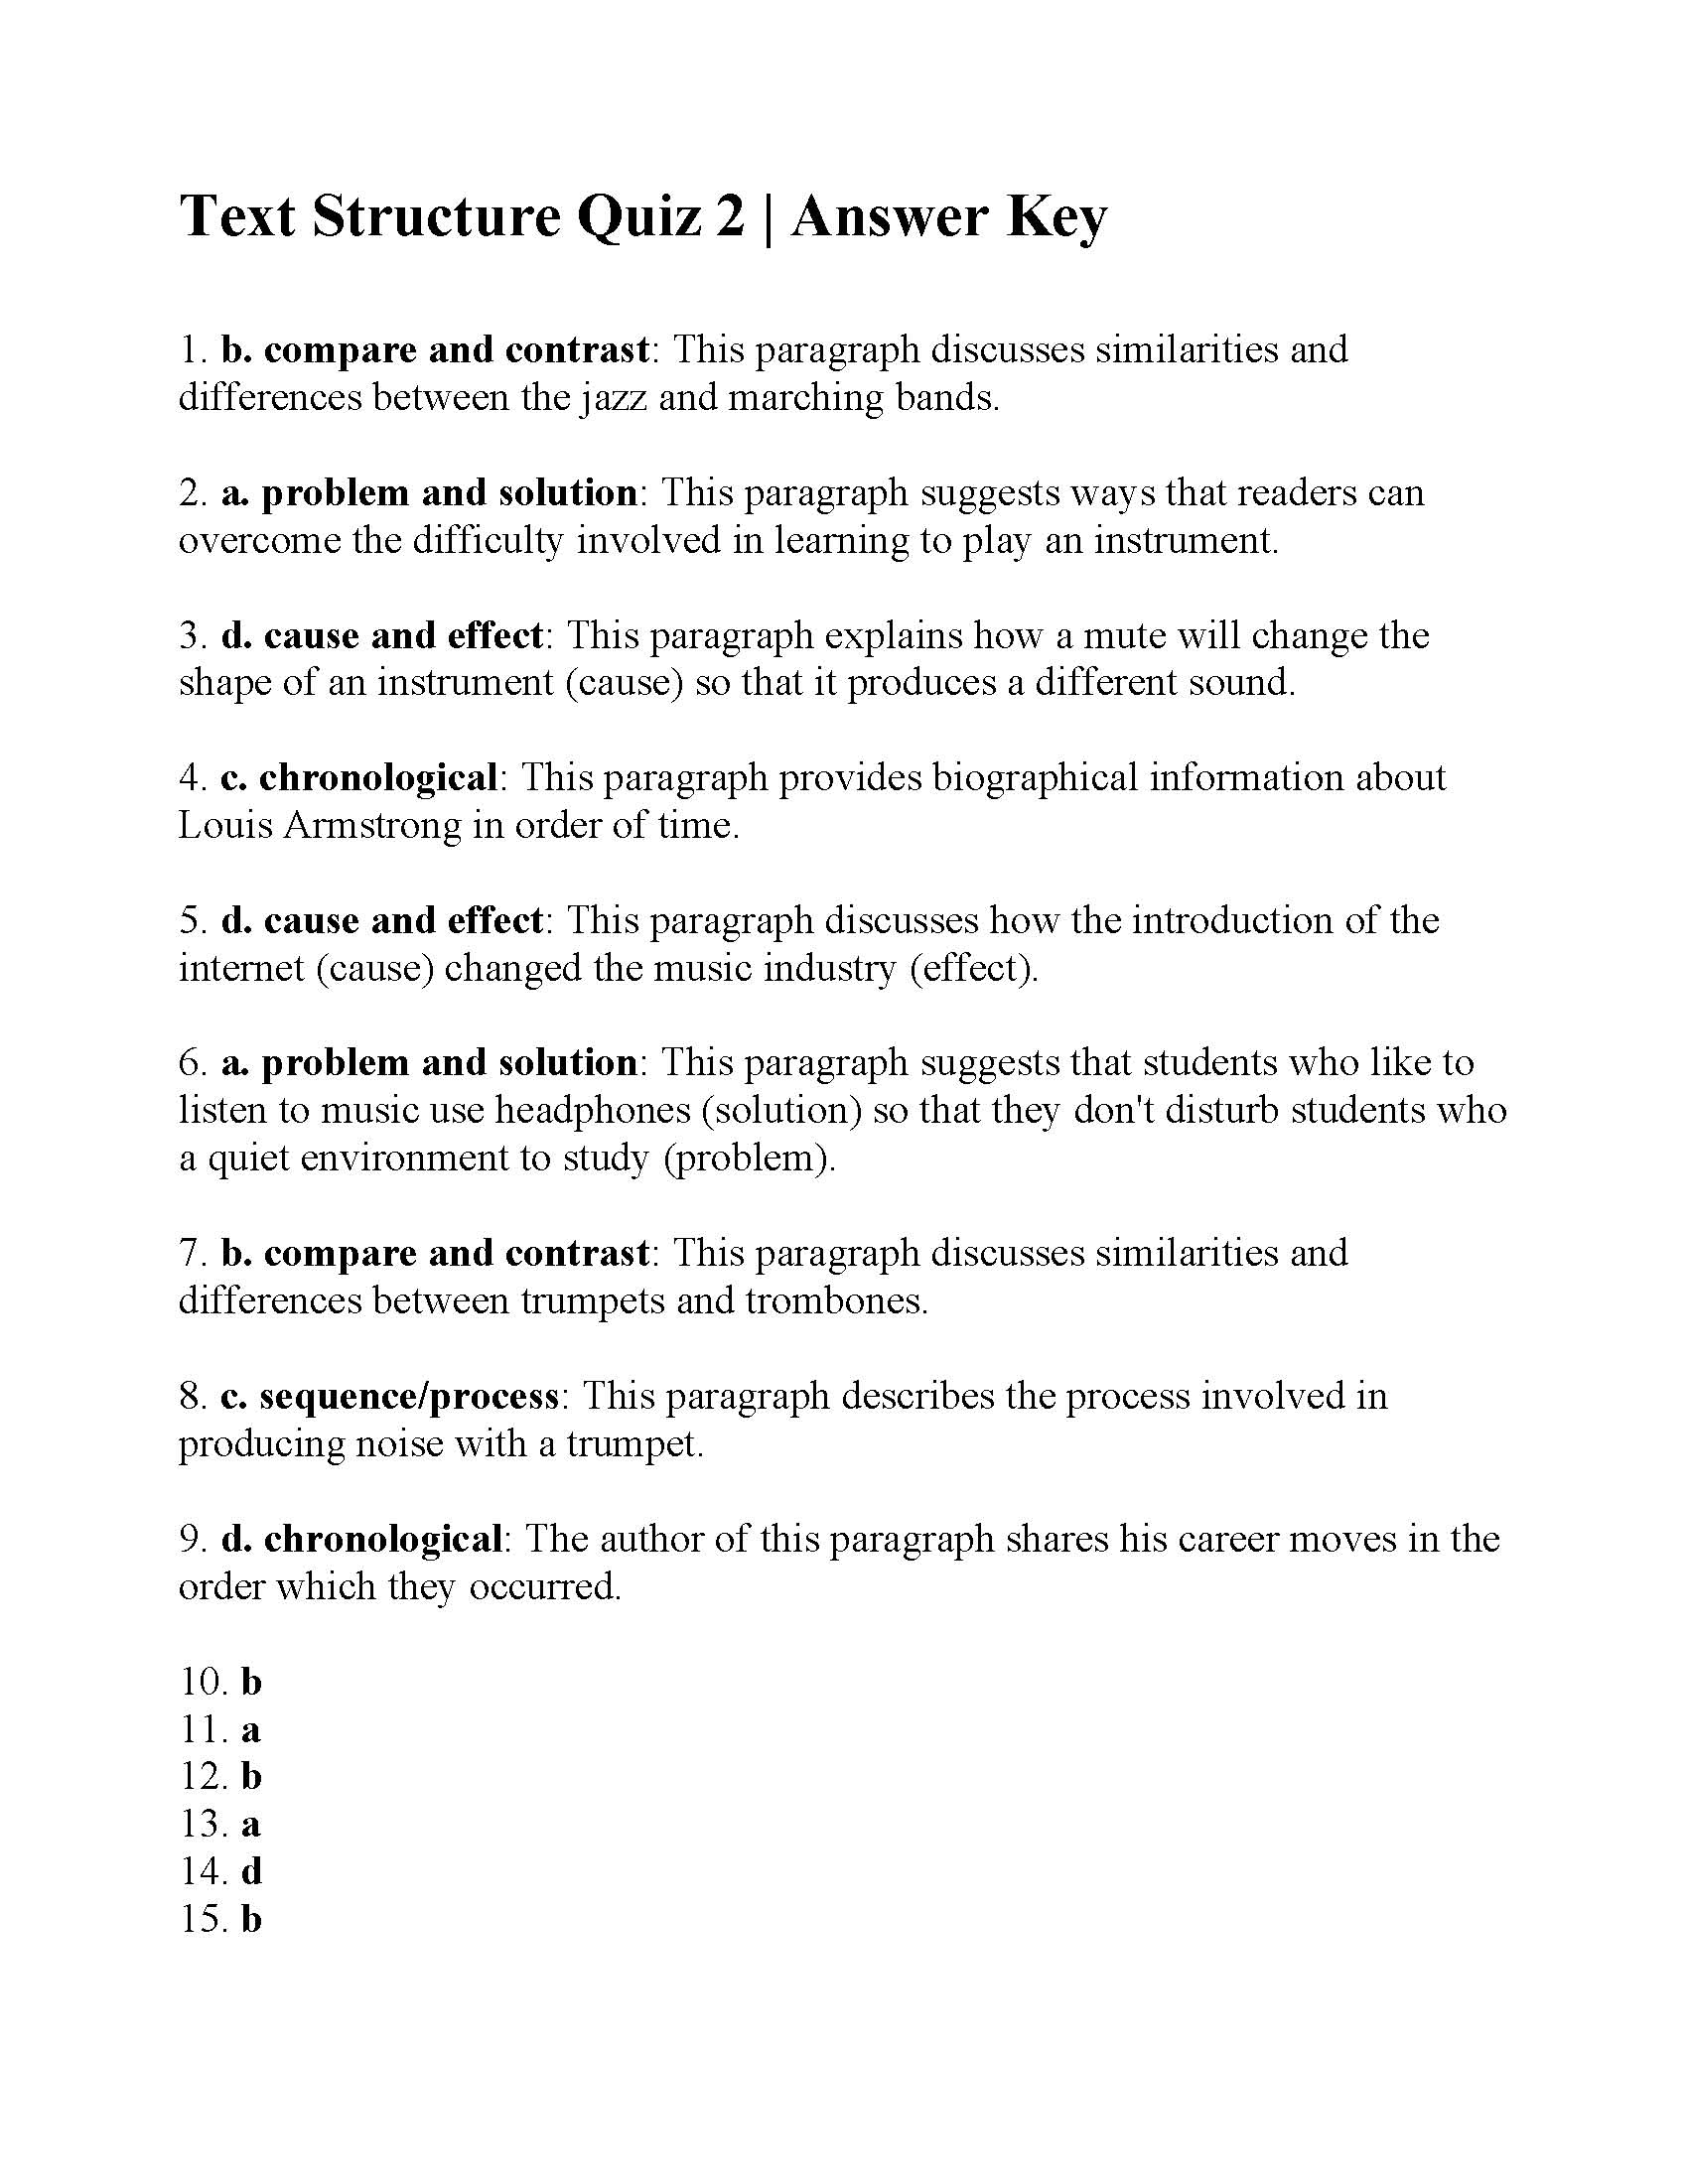 This is the answer key for the Text Structure Quiz 2.